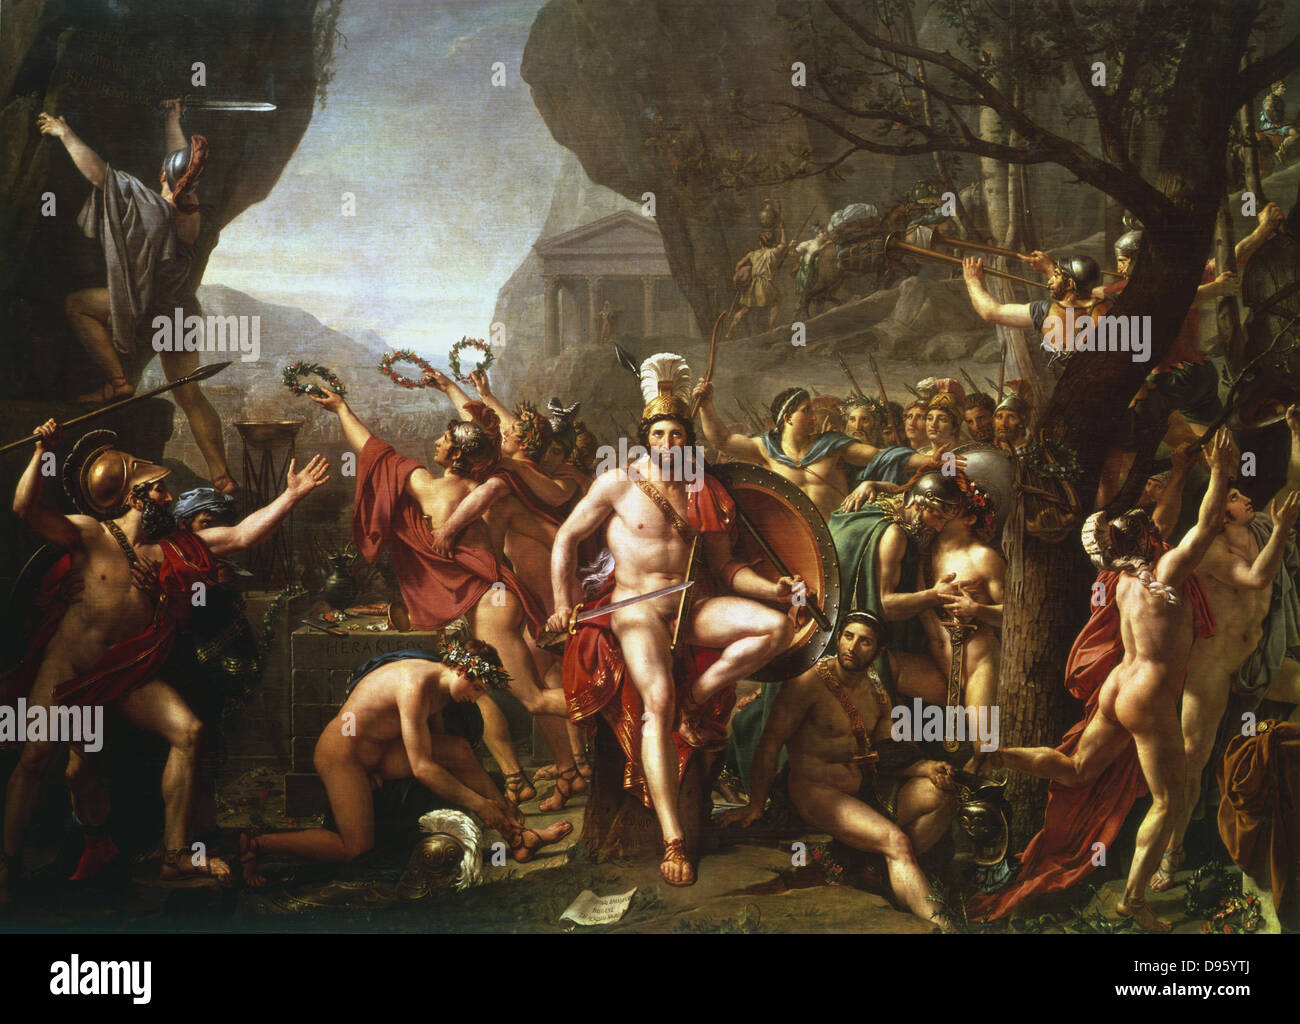 Leonidas at Thermopylae'  (1814).   Leonidas (dc480 BC) king of Sparta from 491 BC. Held pass at Thermopylae for 3 days with 300 Spartans and 700 Thespians against the Persian army. Leonidas and his followers all died.  Jacques Louis David (1748-1825) French painter. Stock Photo